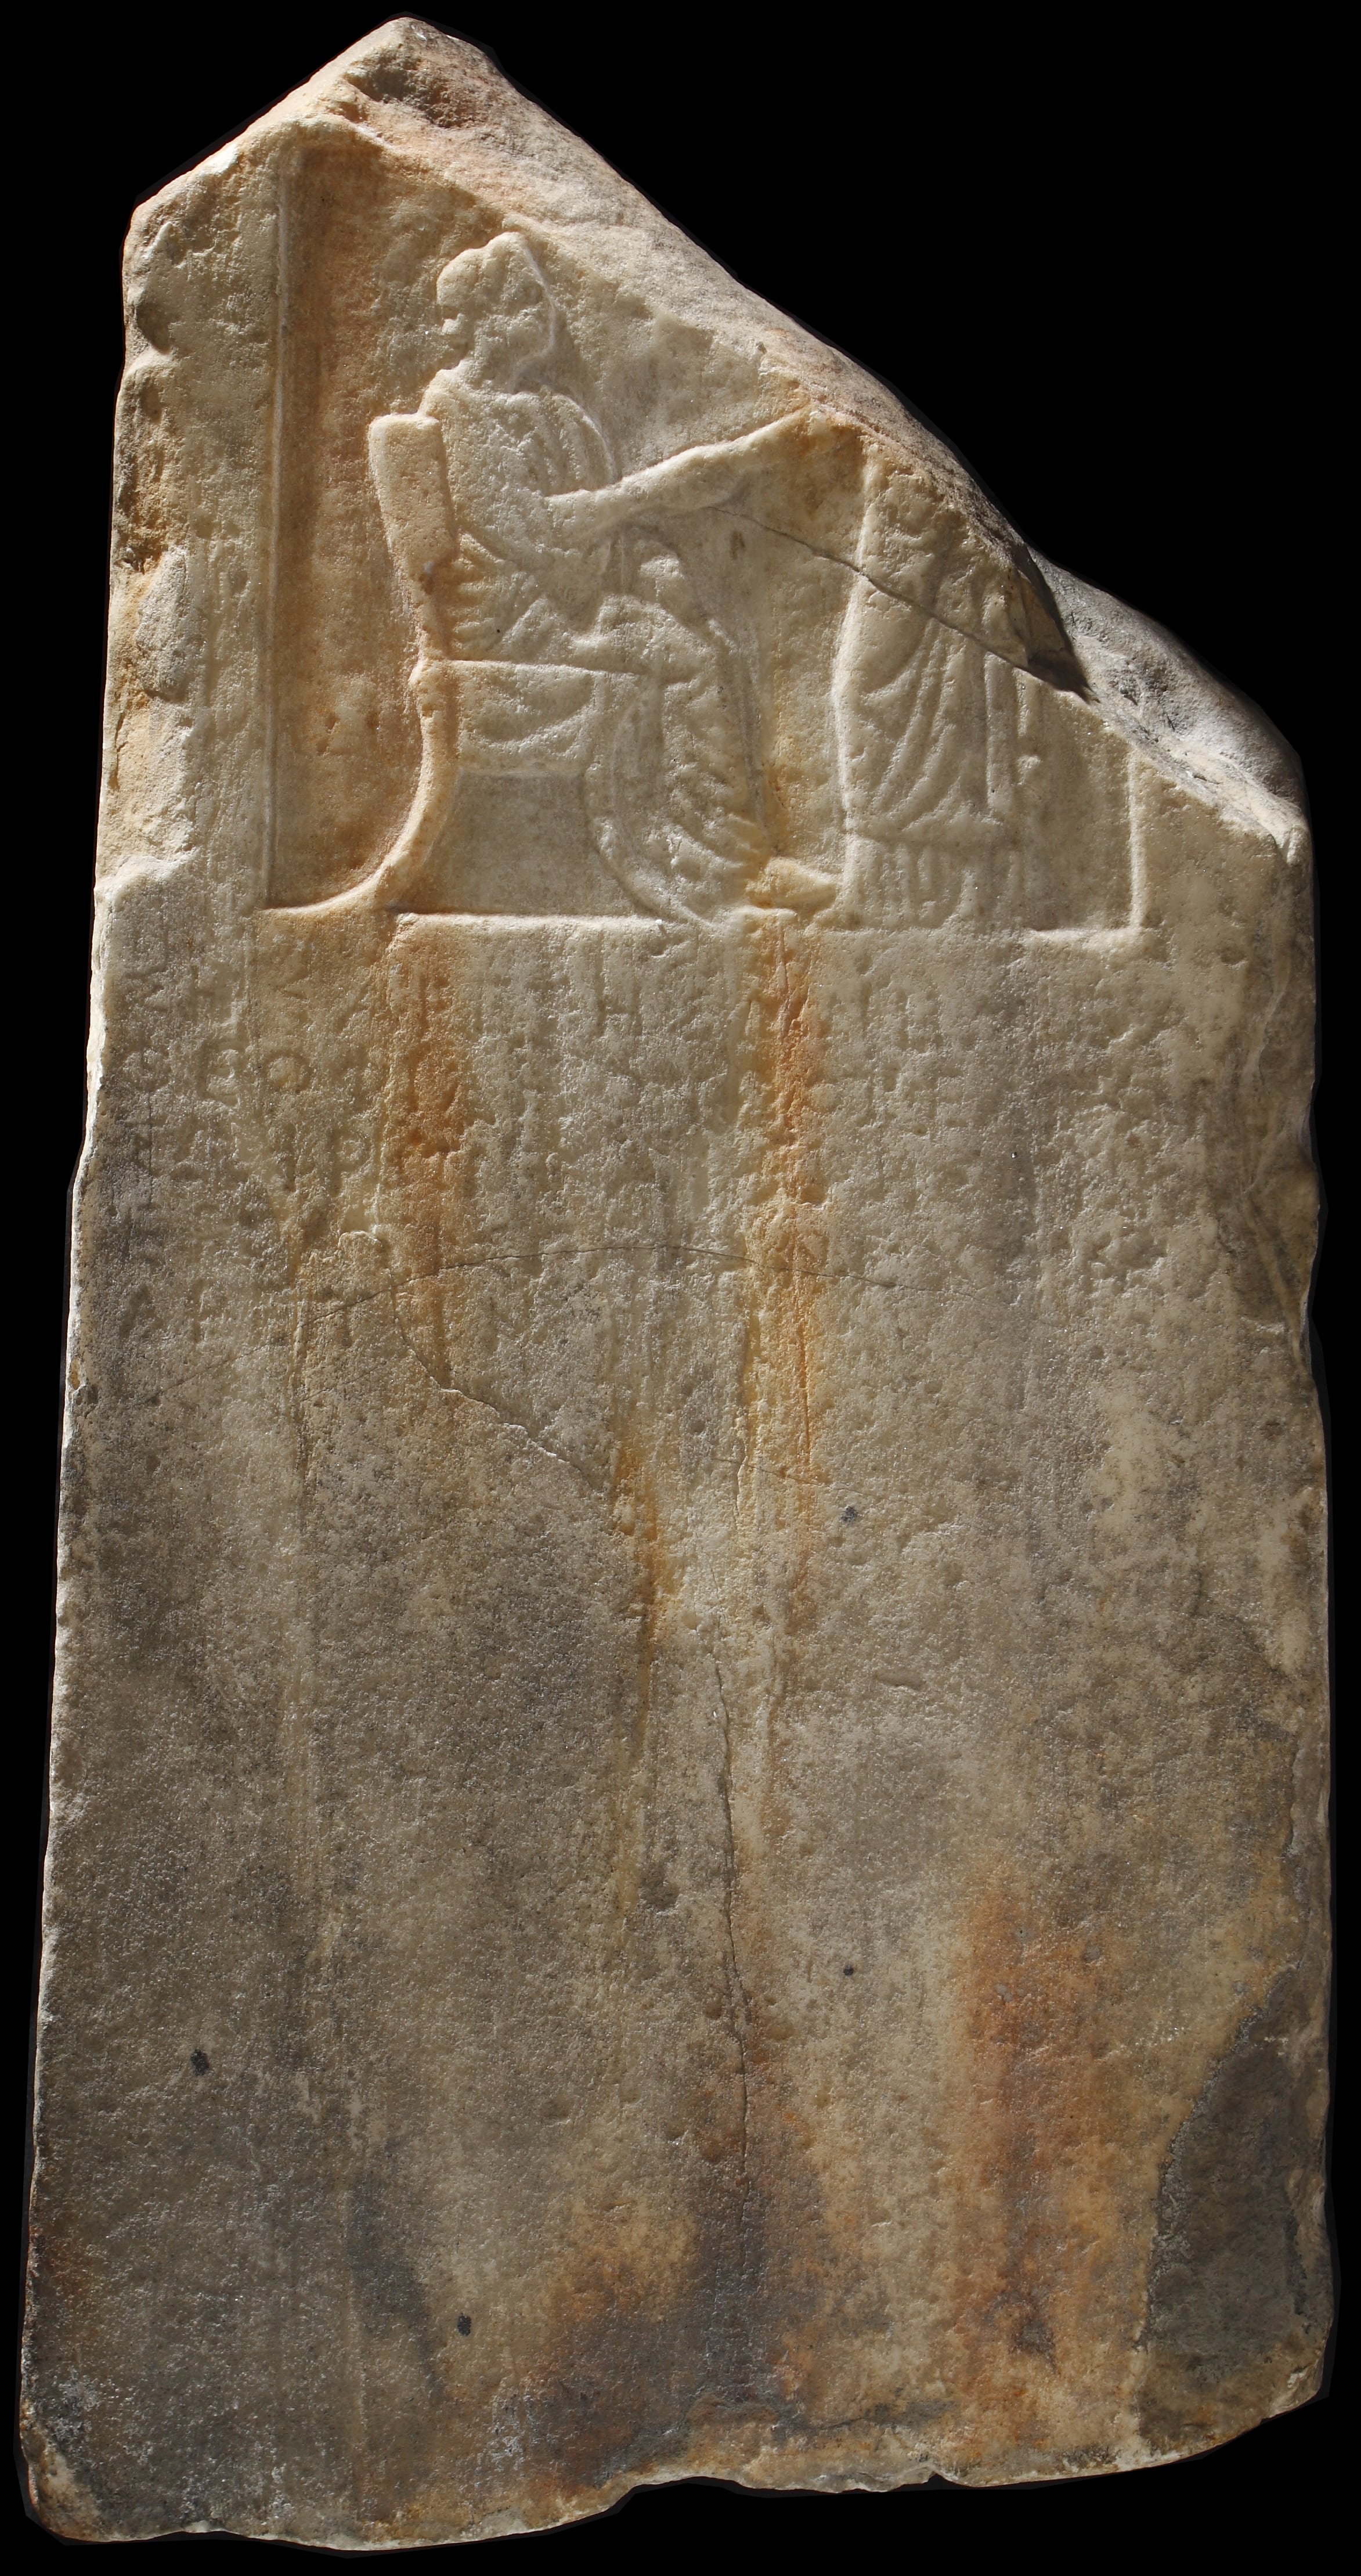 A marble funerary stele: at the top, a seated female figure, on the left, shakes hands with a standing figure.Below, a four line inscription.